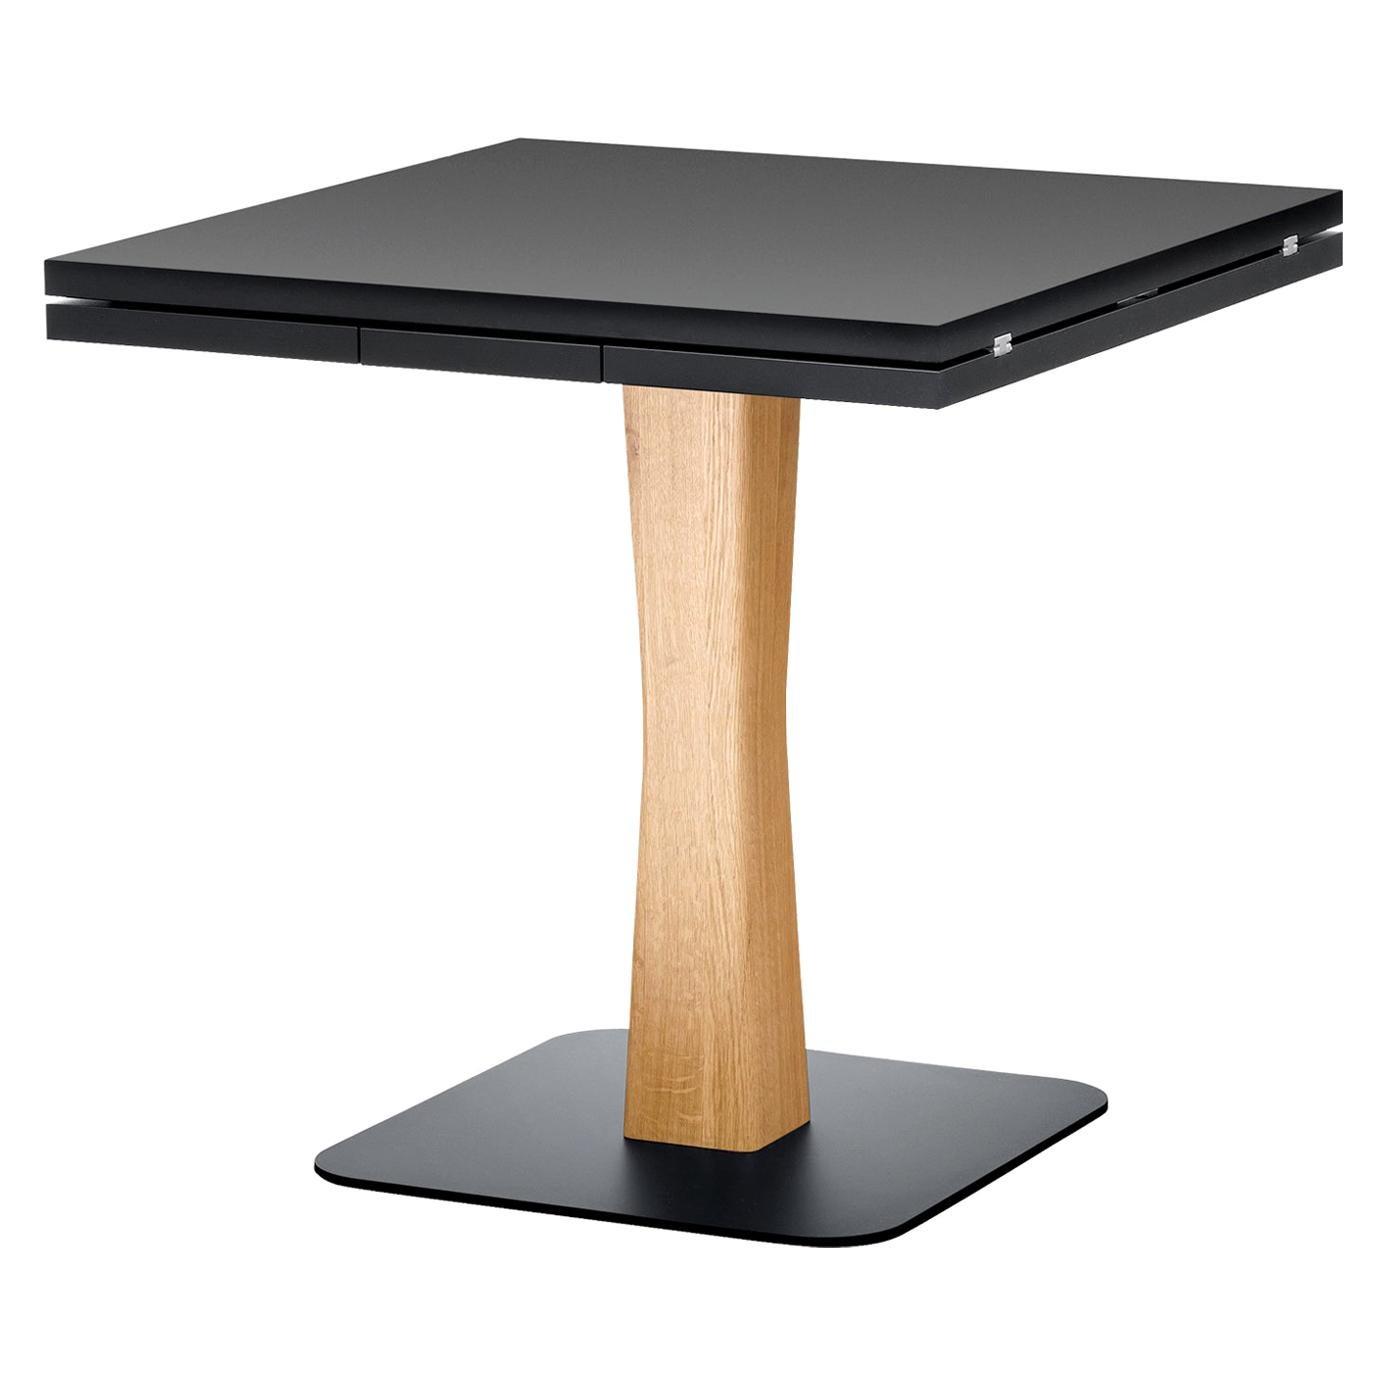 Gualtiero Large Extendible Table with Black Top & Oak Frame by Paolo Cappello